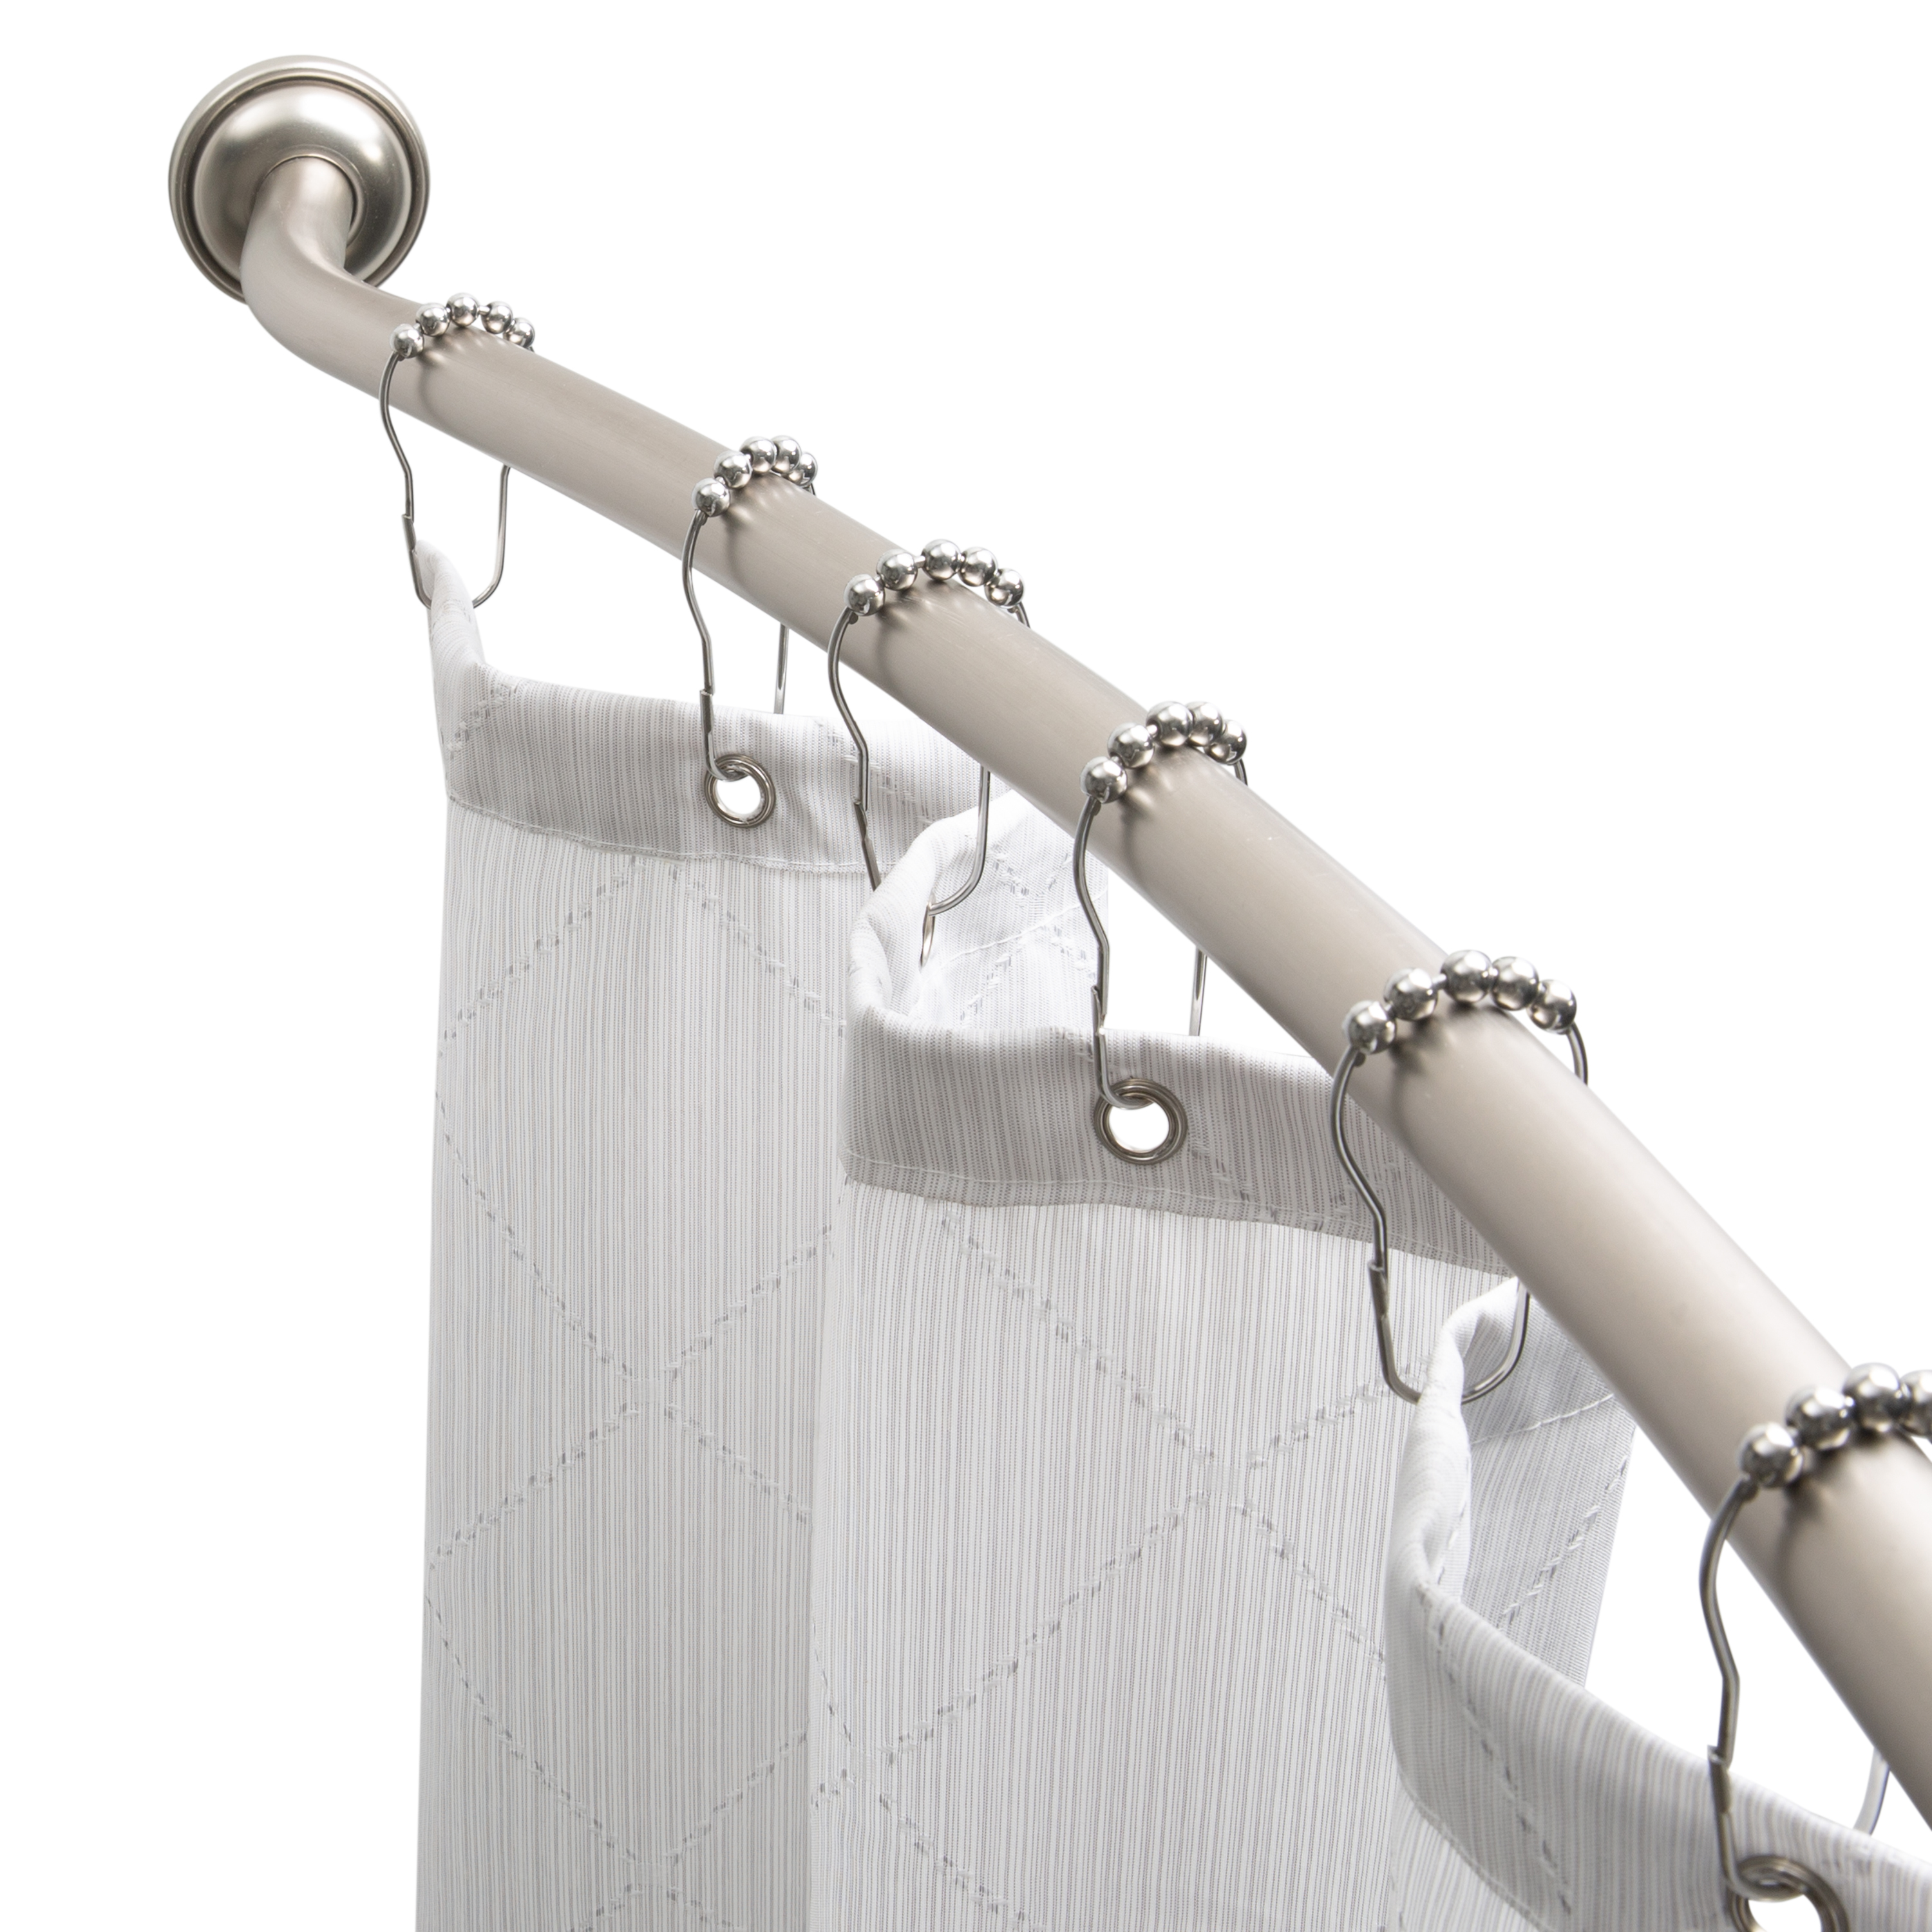 Bath Bliss 44"-72" Adjustable Iron Curved Shower Curtain Rod, Satin Nickel - image 1 of 8